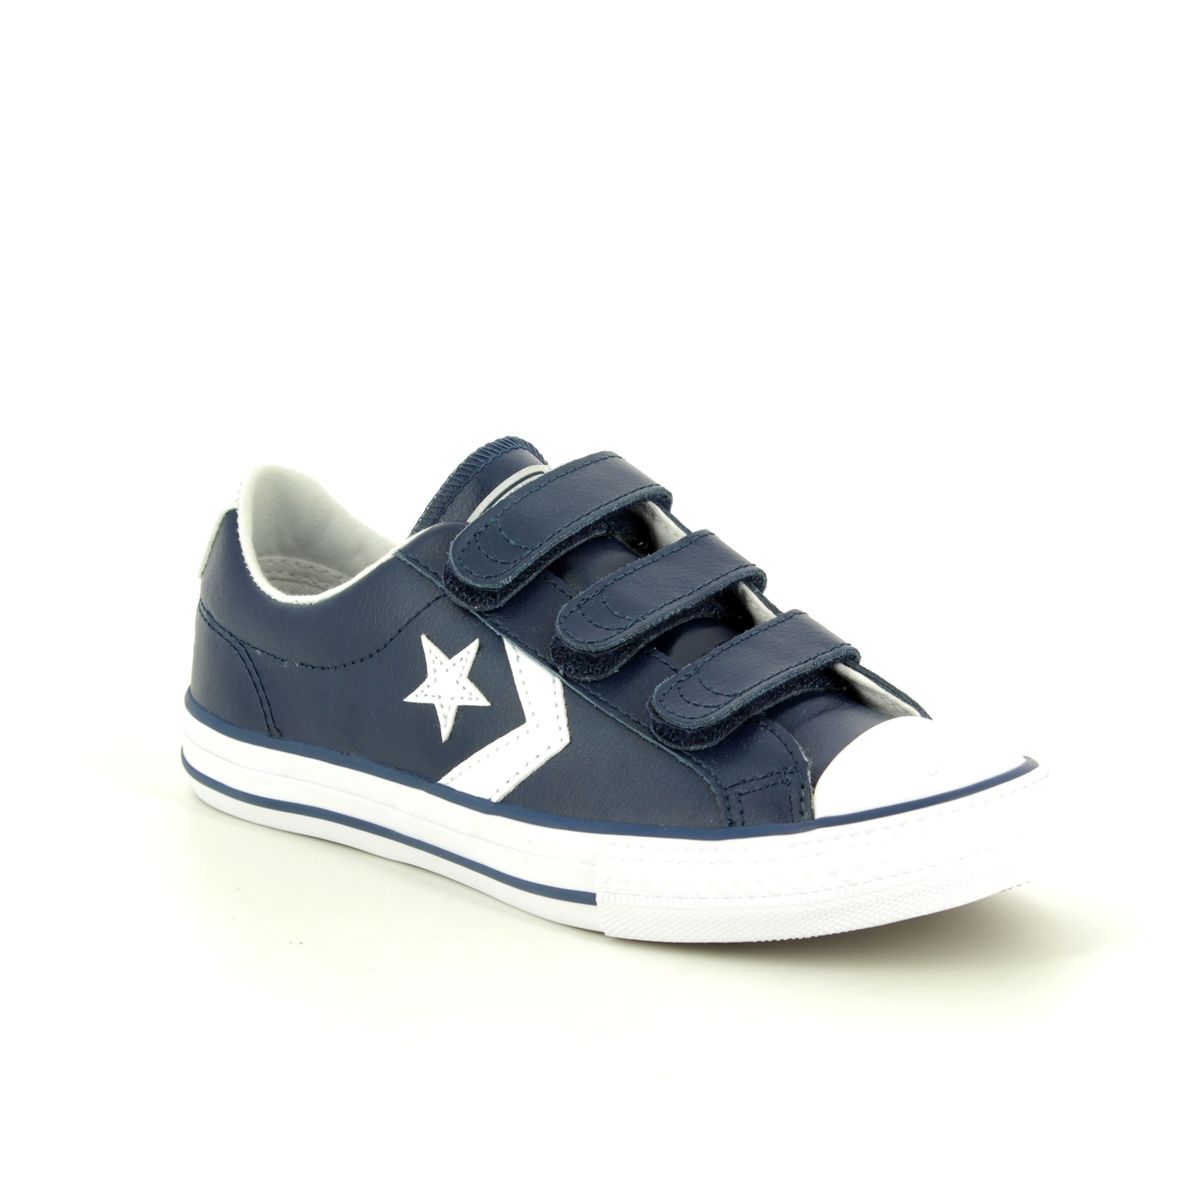 converse trainers star player